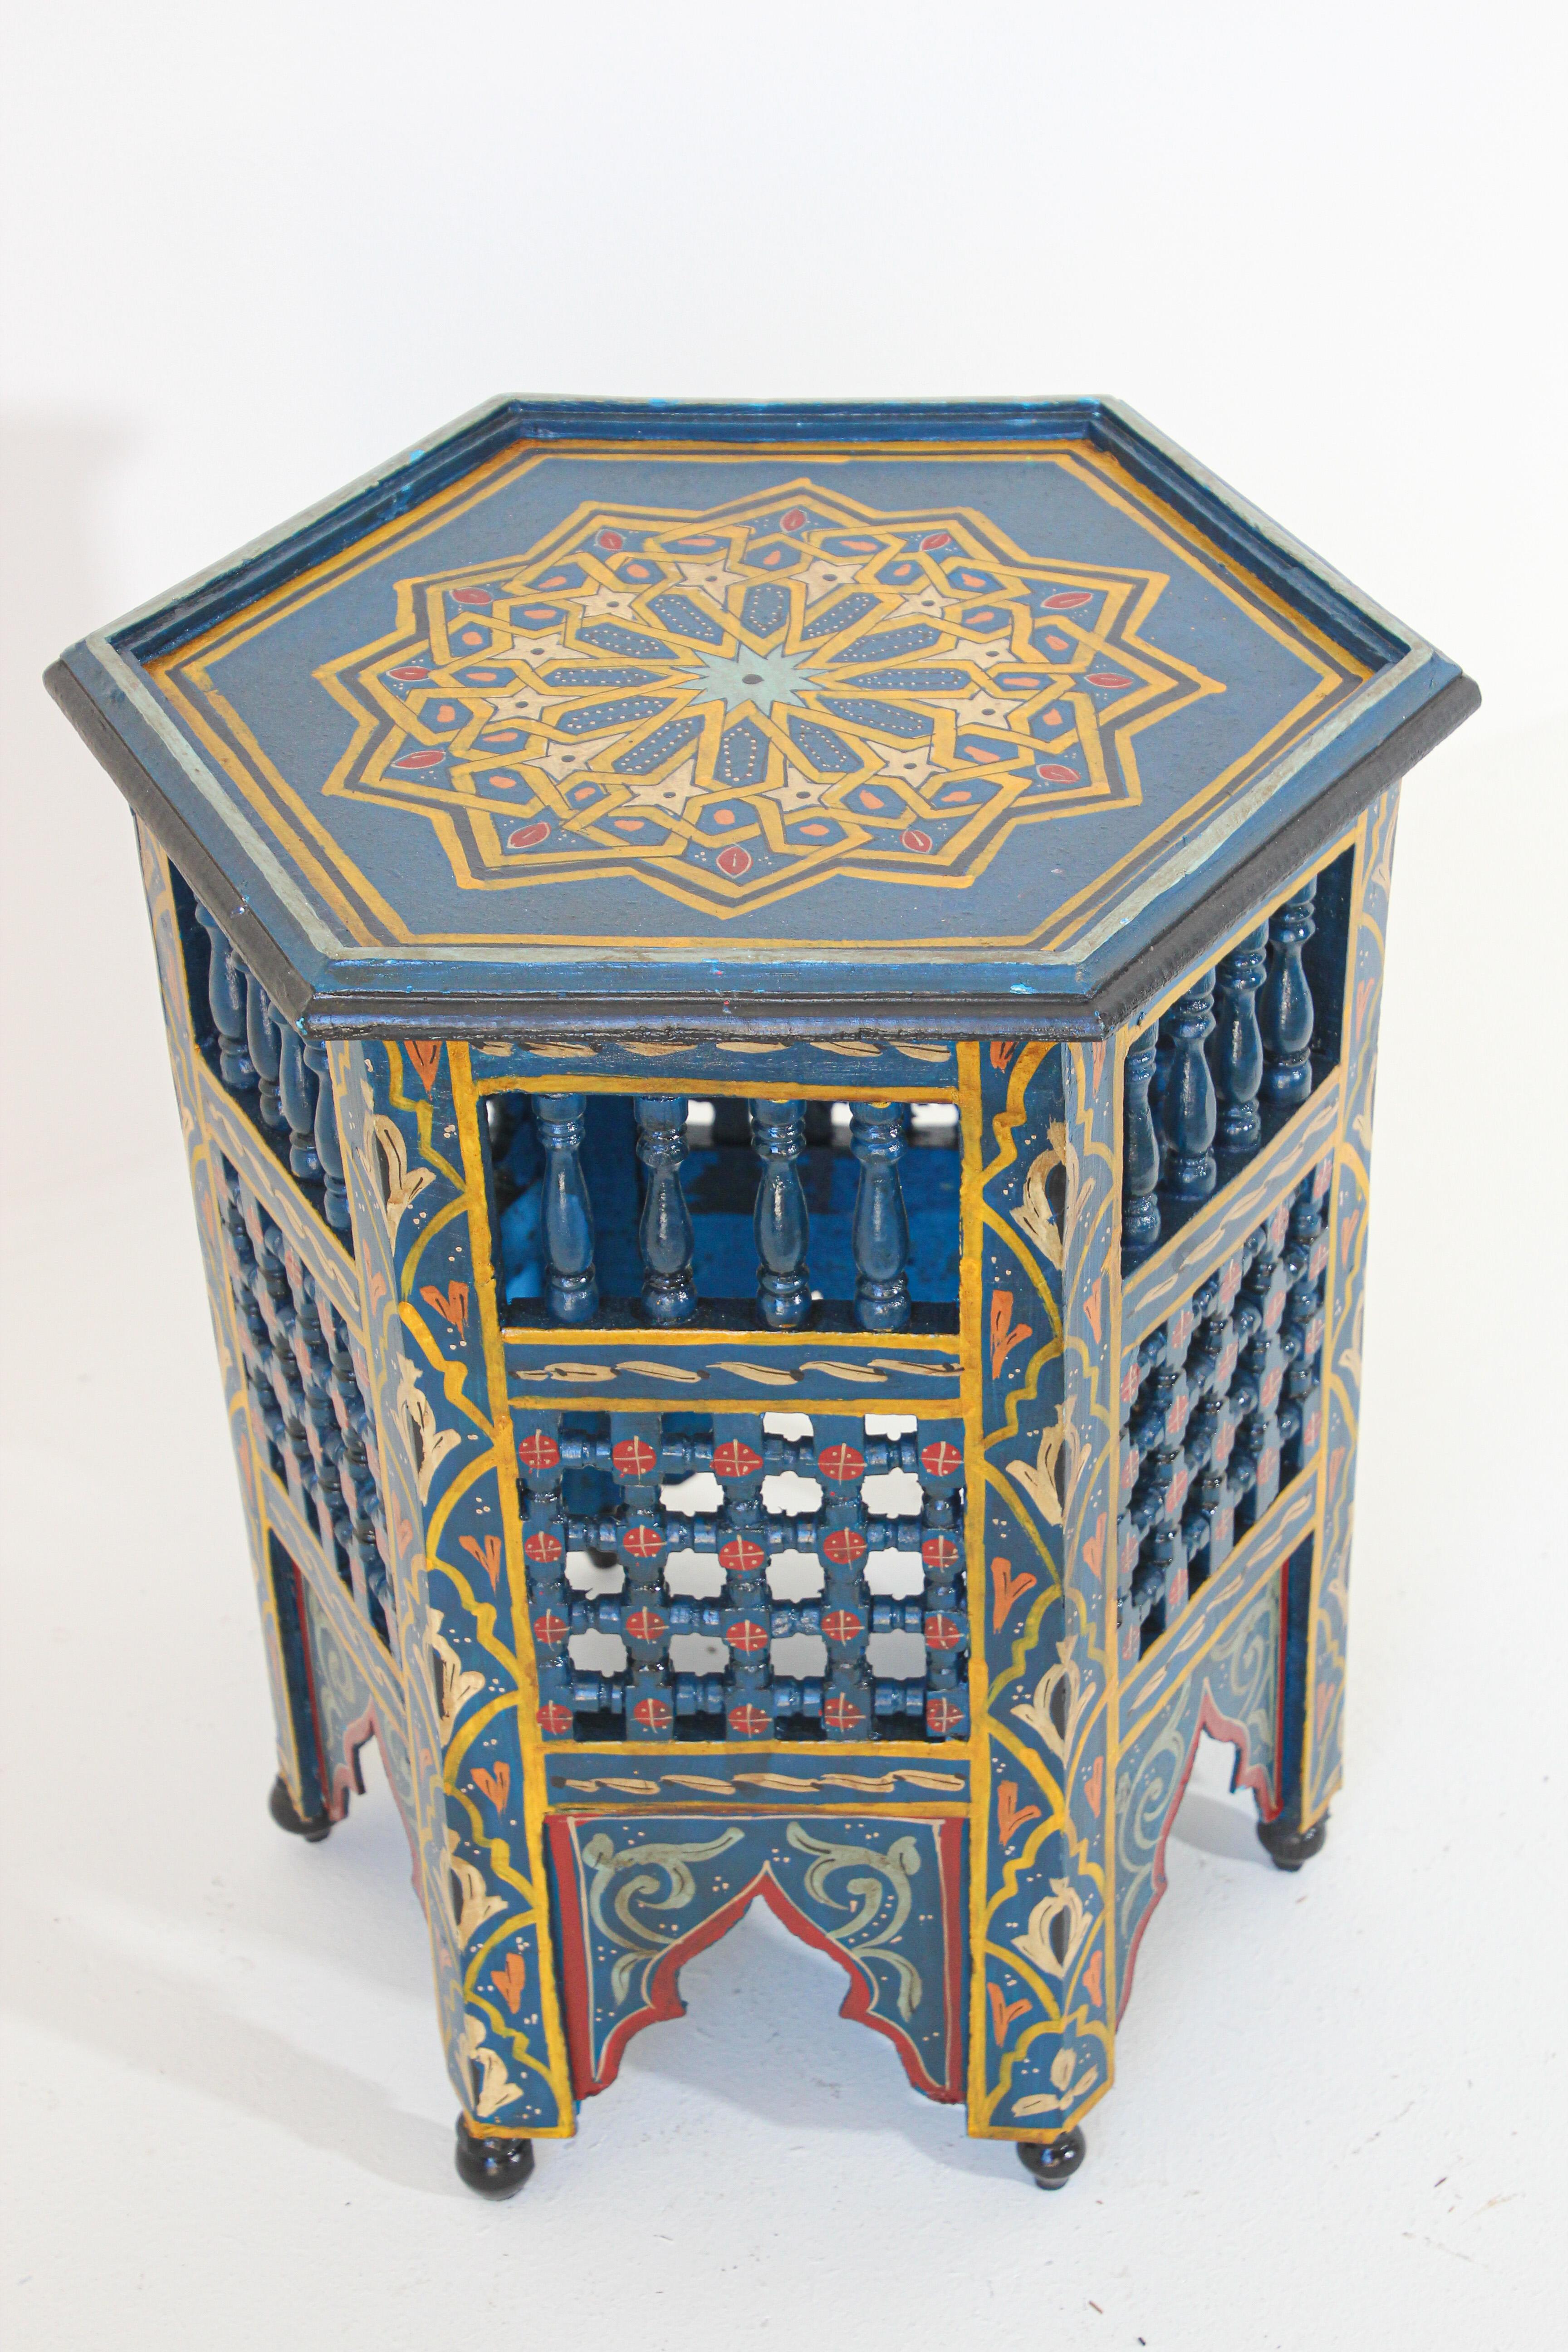 Moroccan Moorish blue handcrafted and hand painted side table.
Moucharabie fret work octagonal stool with Moorish arches.
Handcrafted in Hispano Moresque style and hand painted on blue color background with wine, aqua, green and ochre Moorish